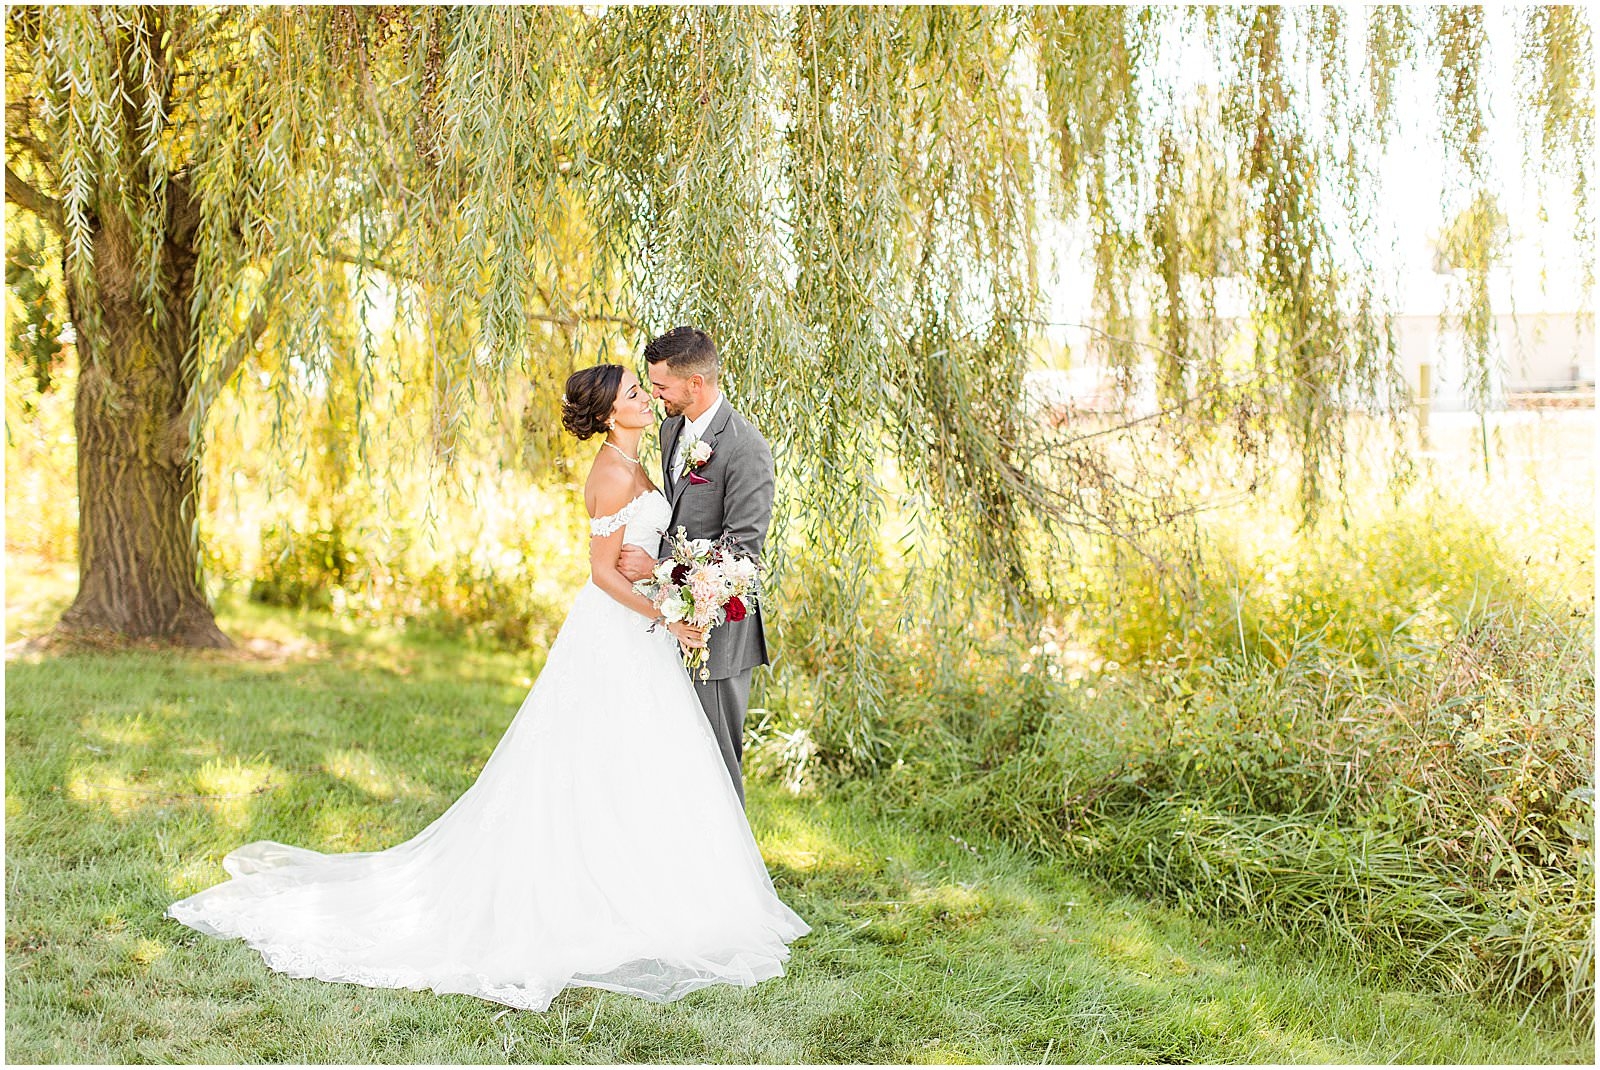 A Stunning Fall Wedding in Indianapolis, IN |. Sally and Andrew | Bret and Brandie Photography 0066.jpg